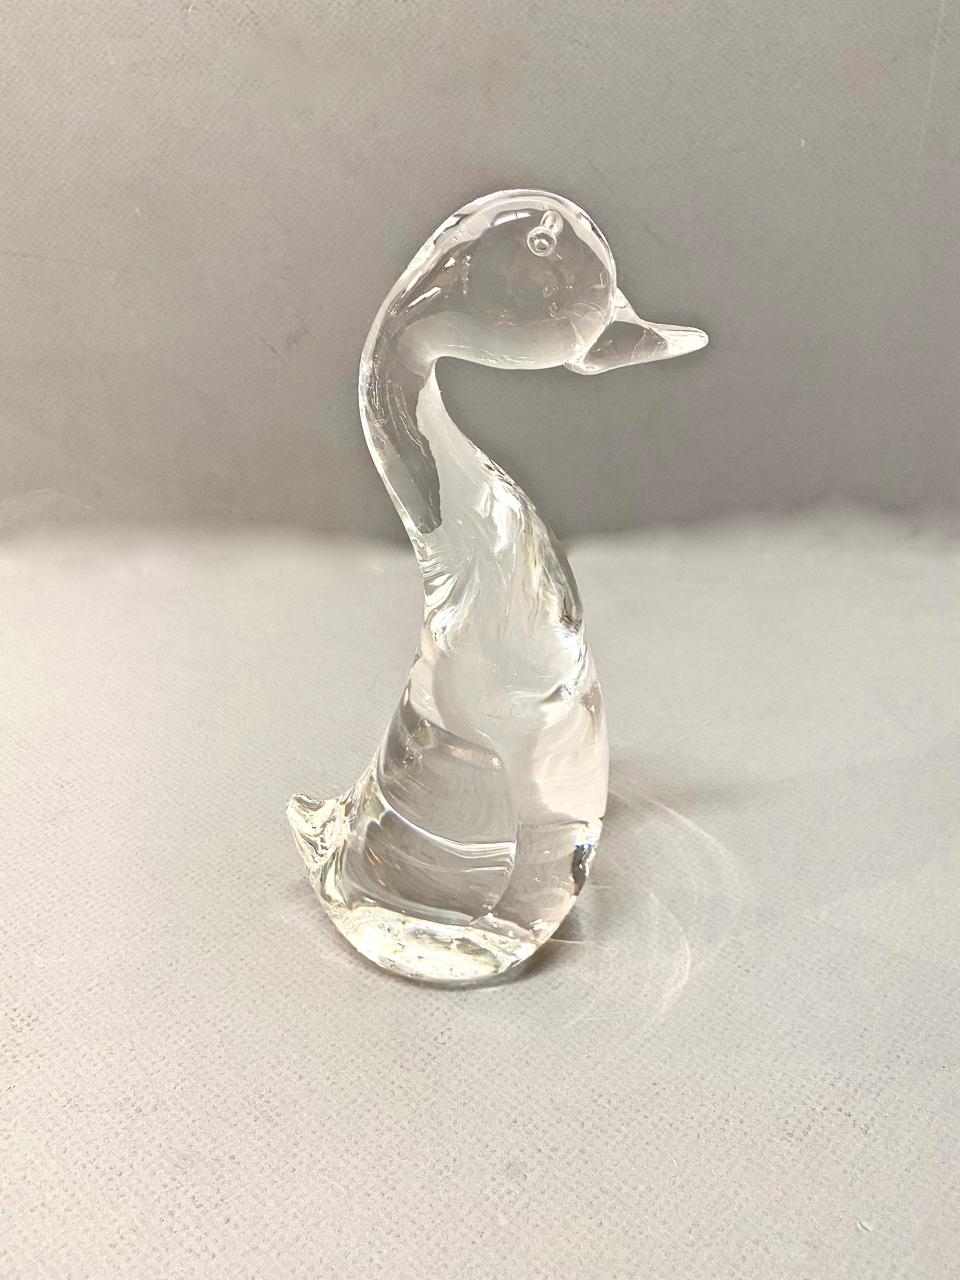 This is a charming Steuben mid-20th century representation of a duck or duckling. The duck is in overall condition and no faults were noted. Signed on bottom.